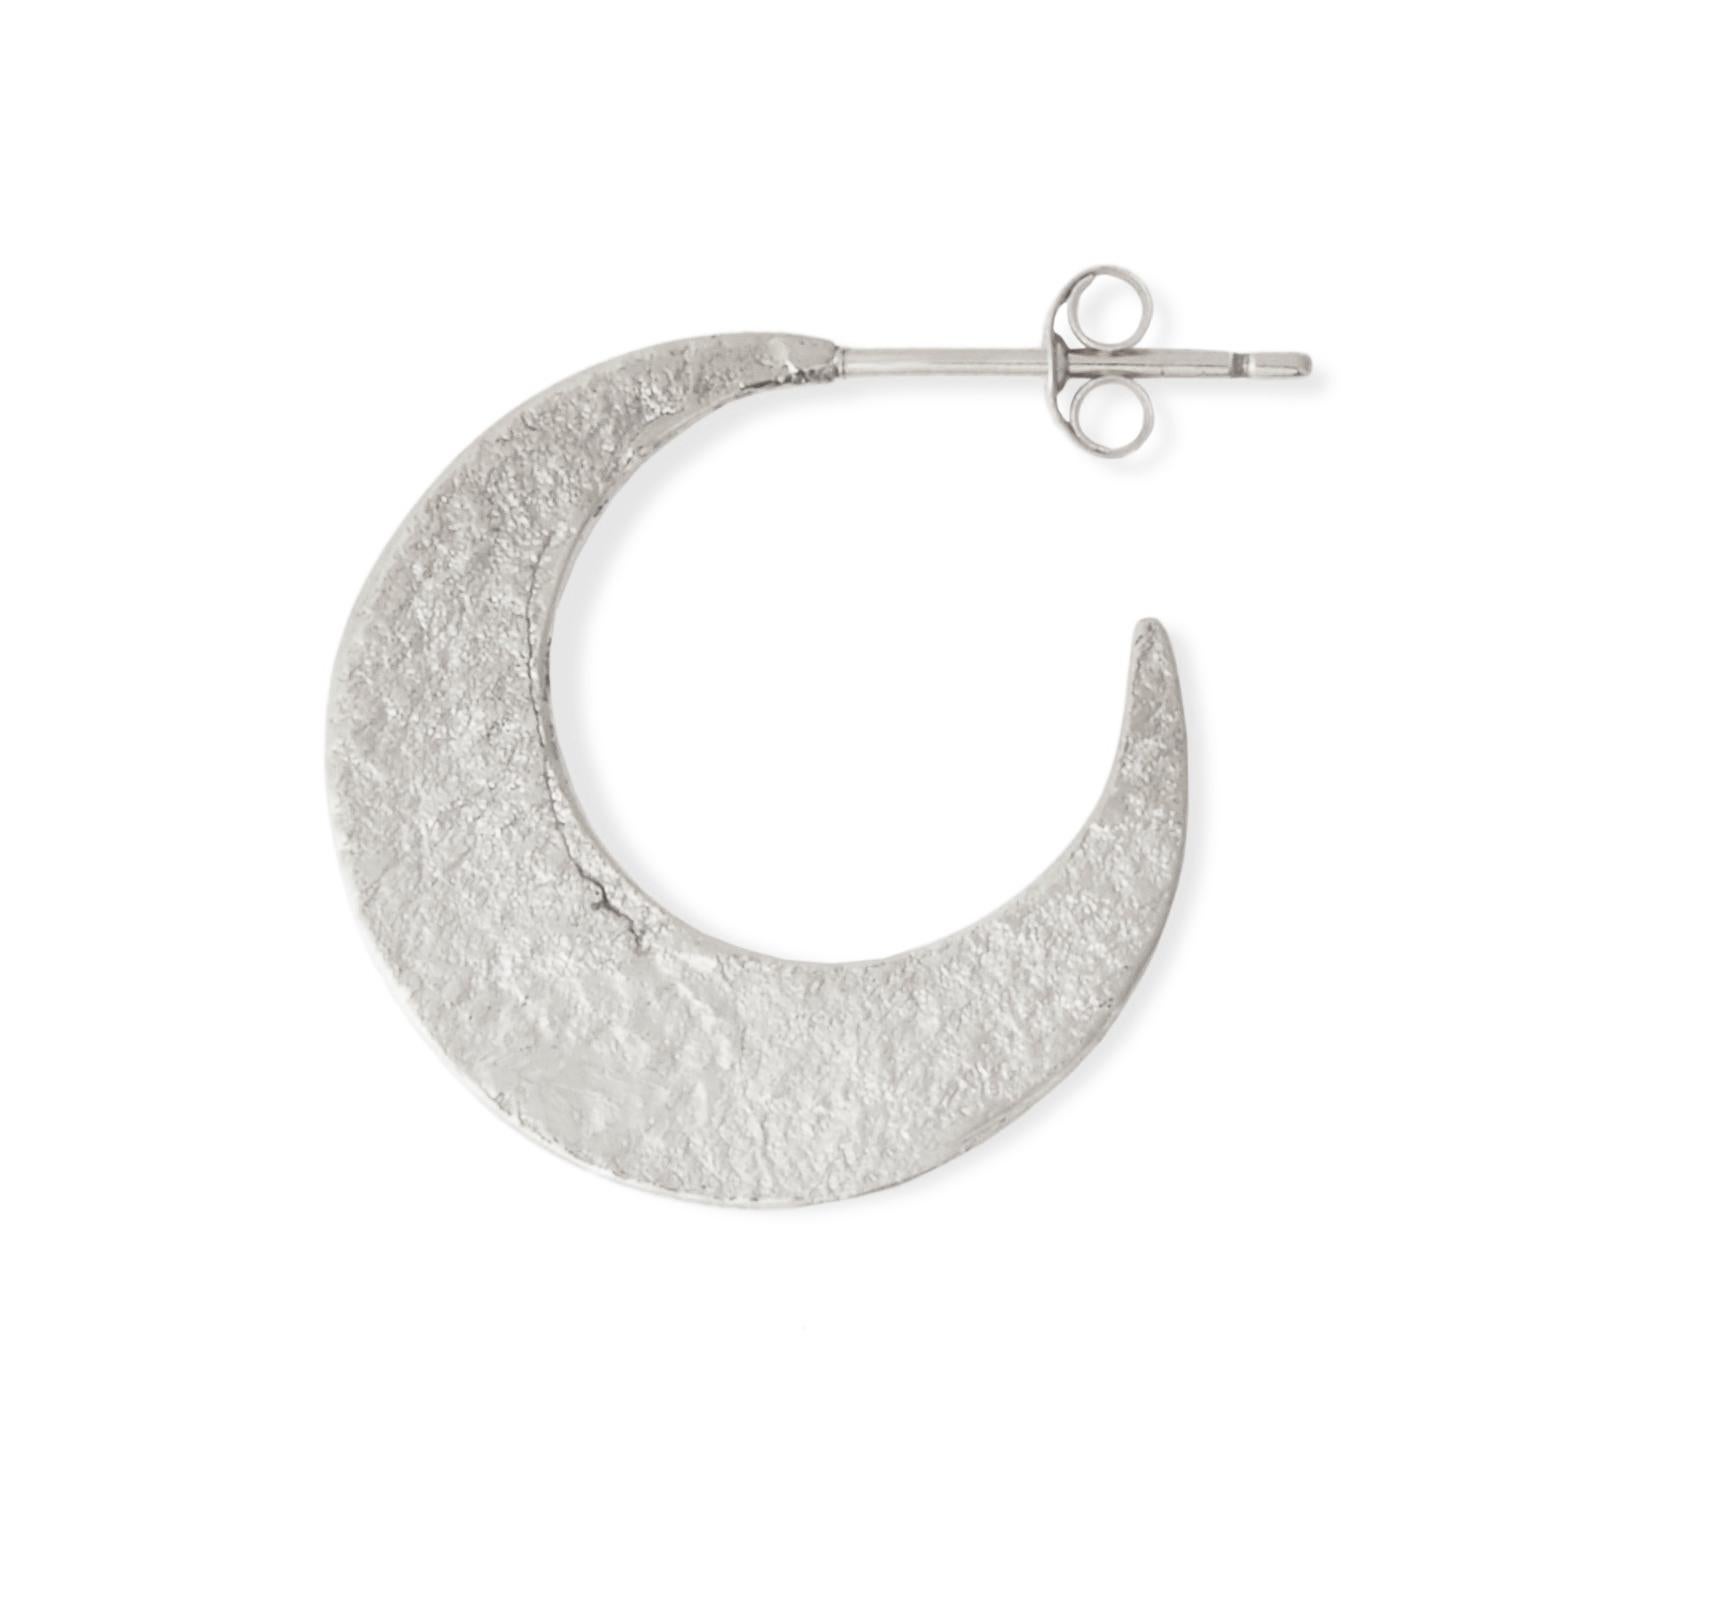 These textured crescent-shaped hoop earrings by Allison Bryan are handcrafted in  sterling silver with a post and butterfly closure.  They feature a shimmering texture on one side and a rustic high-polish finish on the other so can be worn with